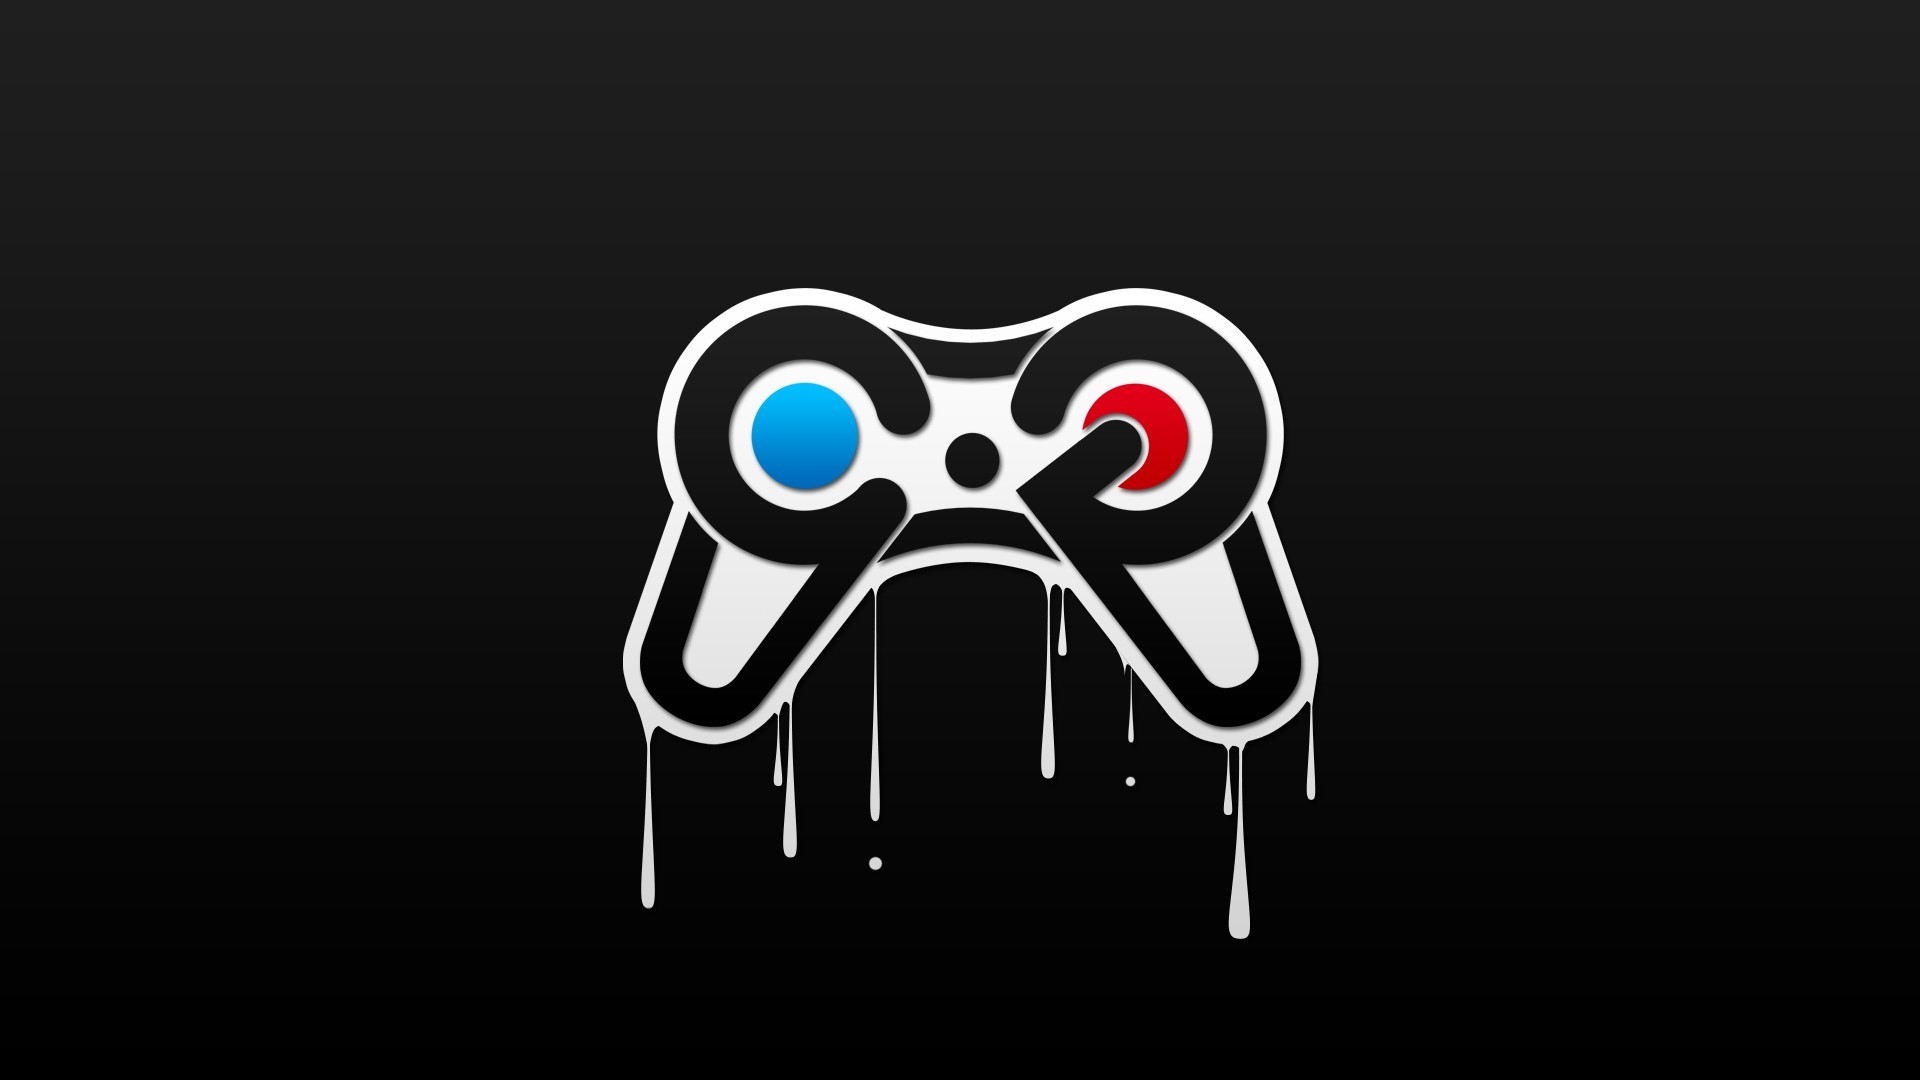 1920x1080 Video Game Controller Wallpapers For Iphone | Amazing Wallpapers |  Pinterest | Game controller and Wallpaper